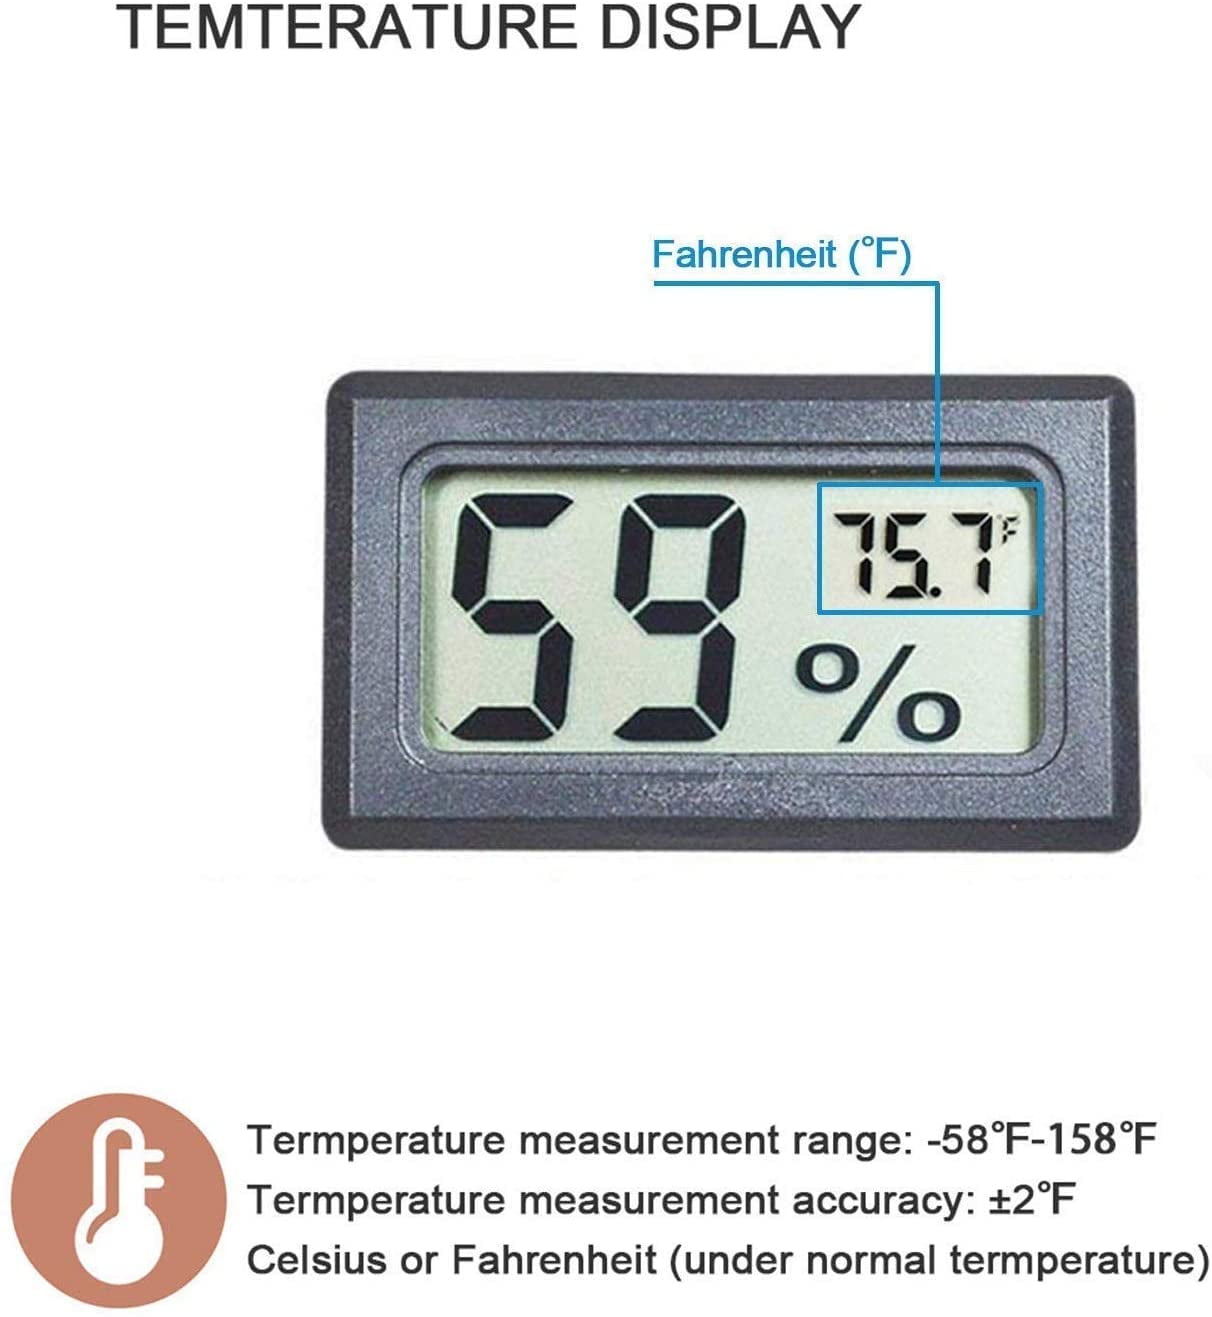 Indoor Hygrometer Thermometer, Humidity and Temperature Sensor Gauge With  Large LCD Display, Portable Transmitter, ℃/℉,12H/24H Format, Black 